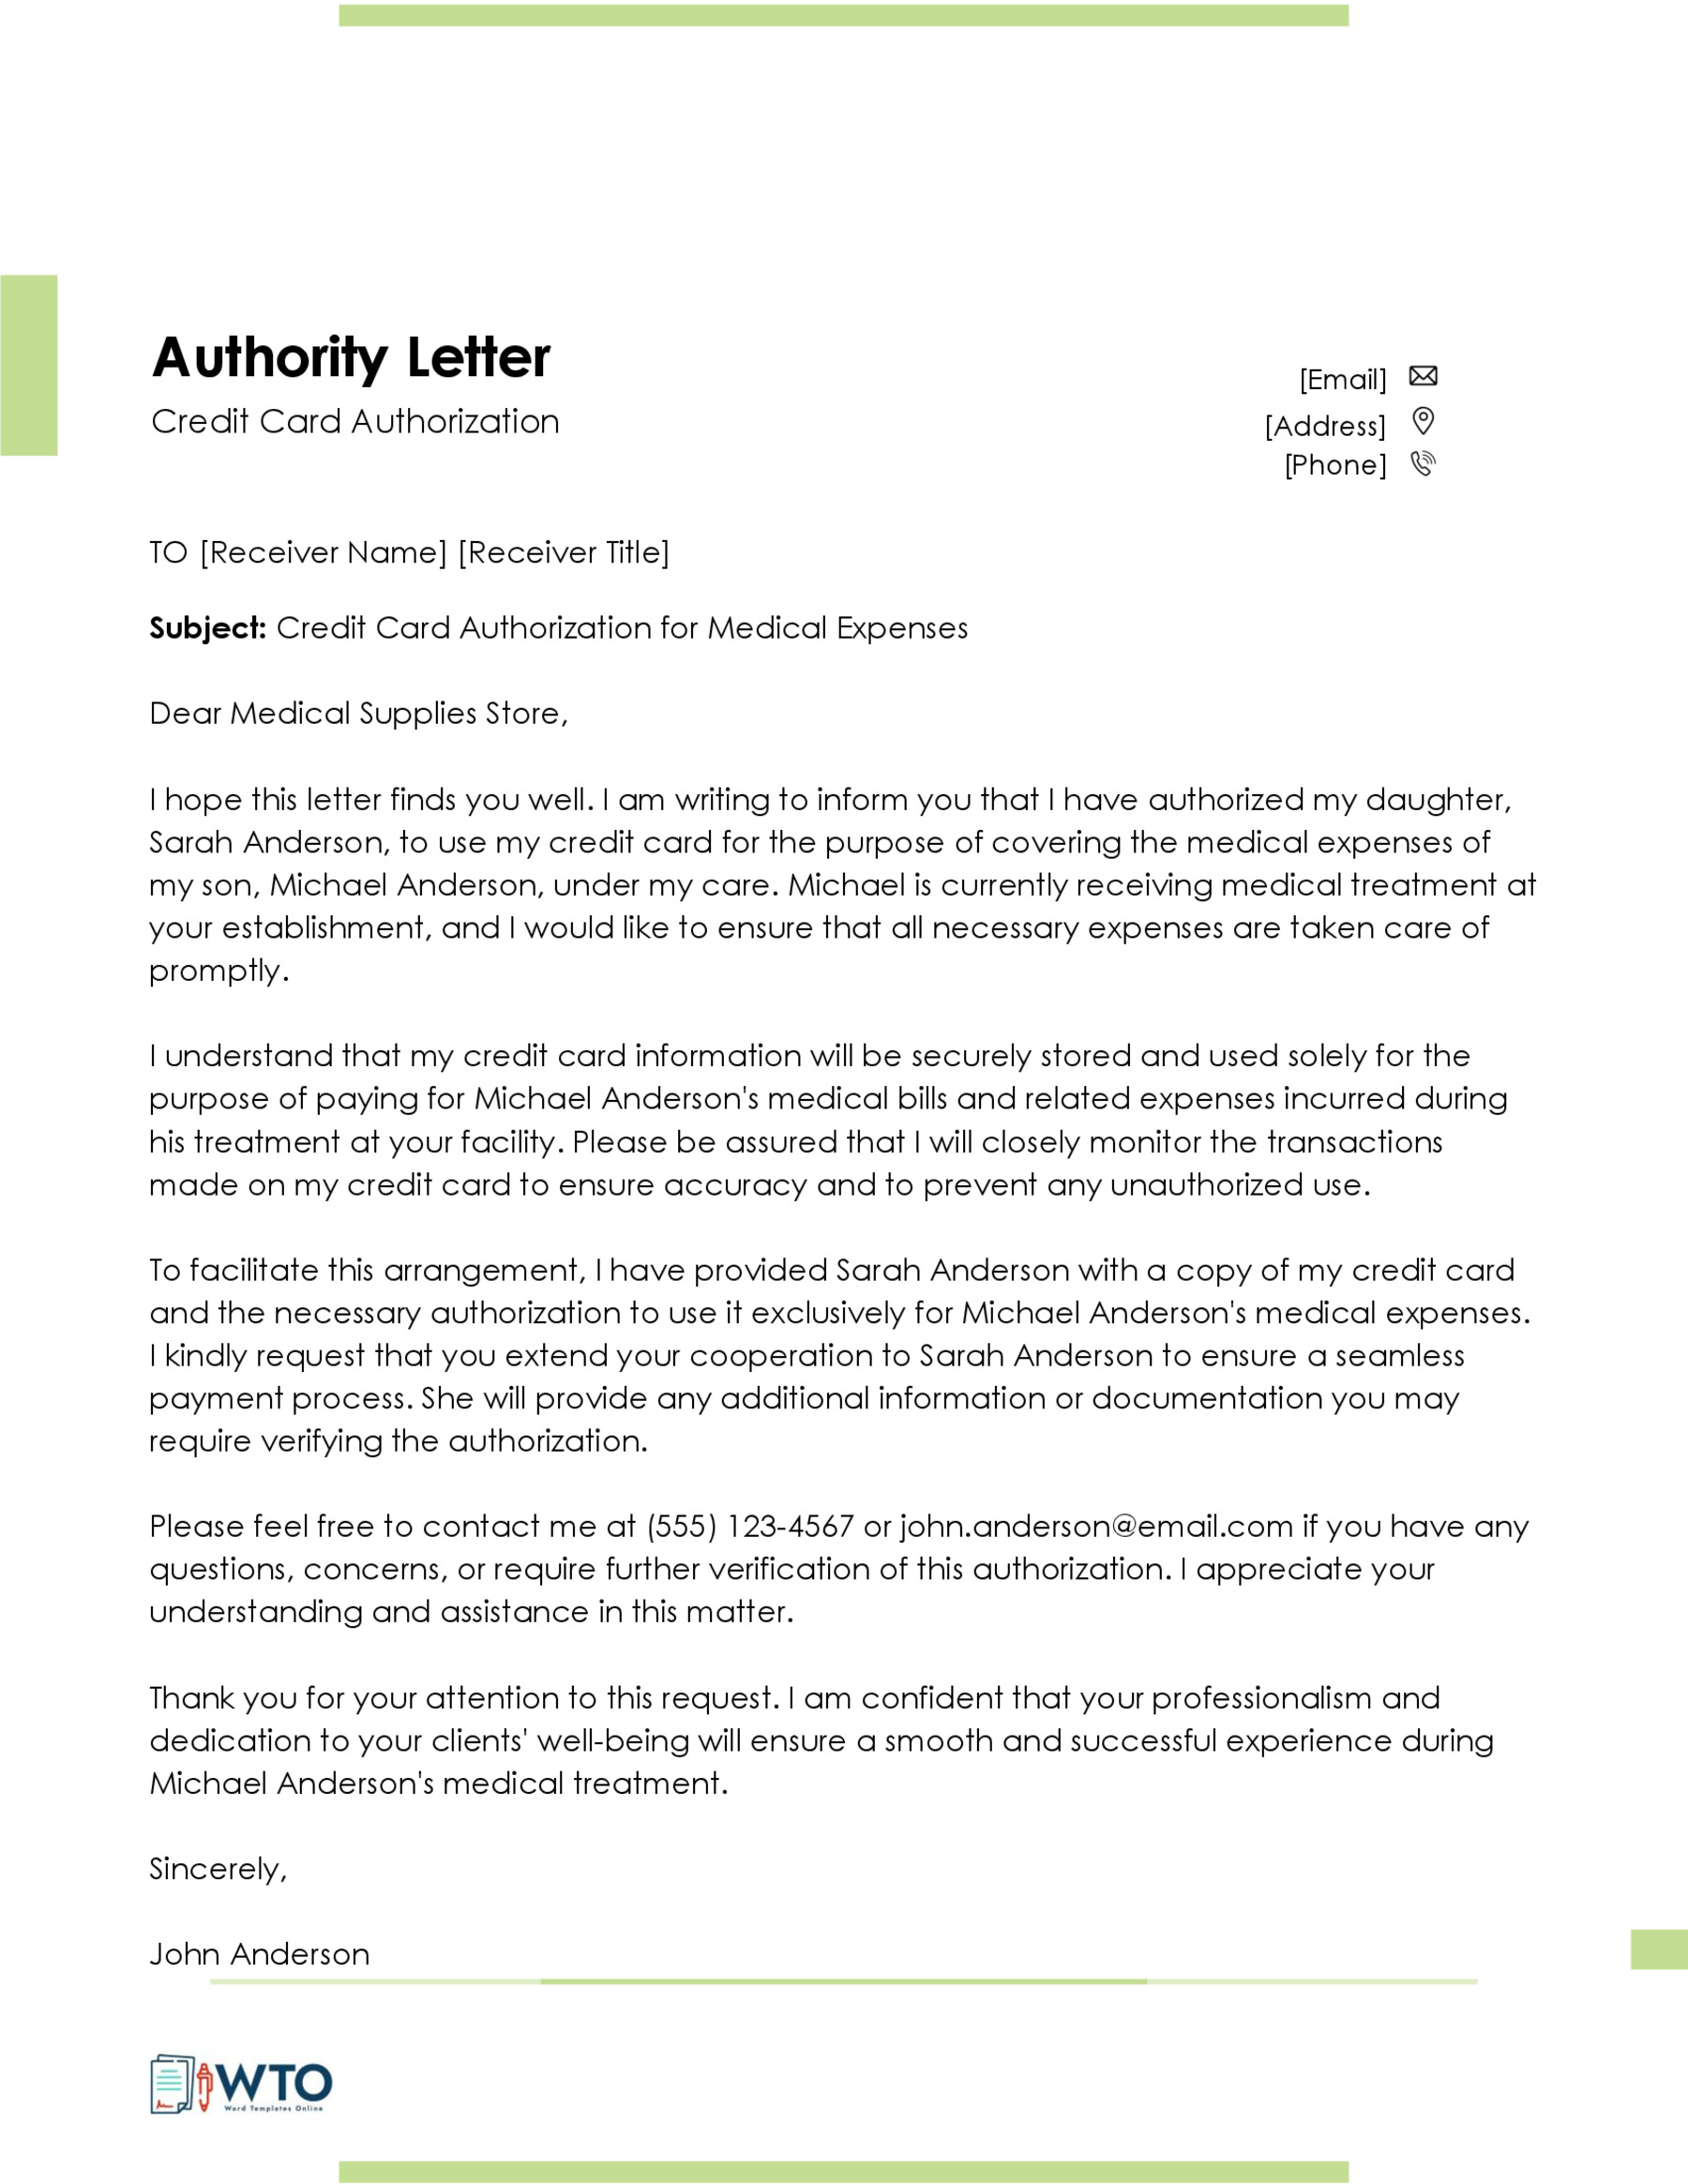 Sample Credit Card Authorization Letter-Downloadable